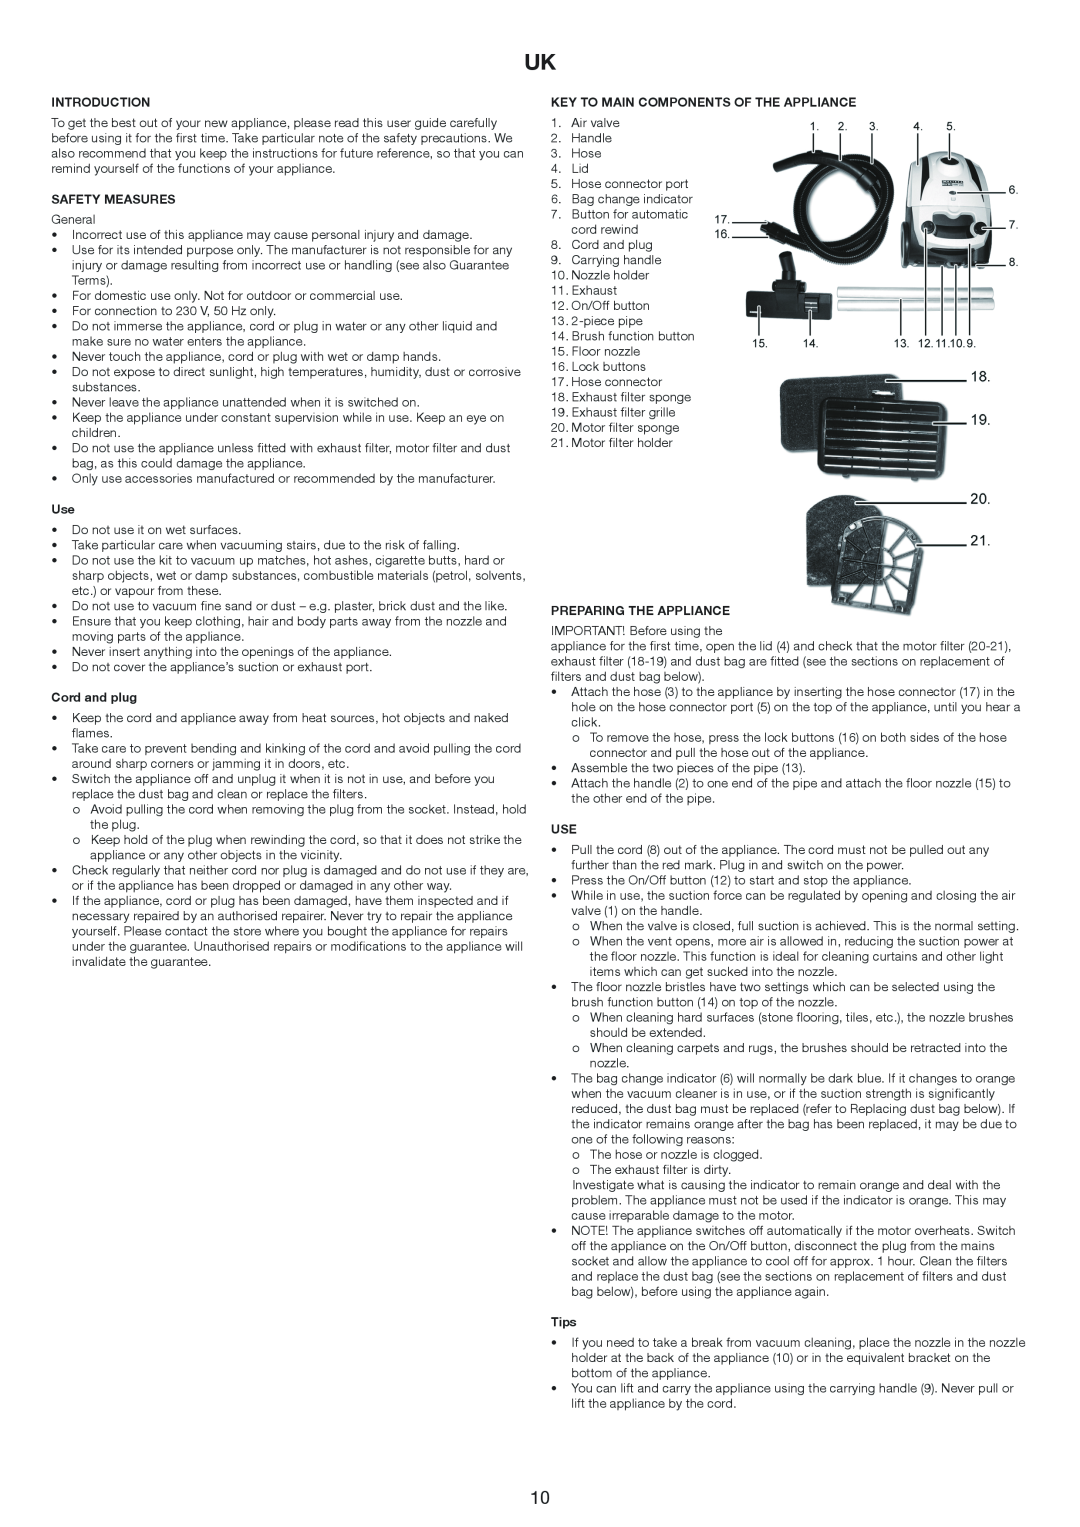 Melissa 640-171 manual Introduction, Safety Measures, Cord and plug, Key To Main Components Of The Appliance, Tips 